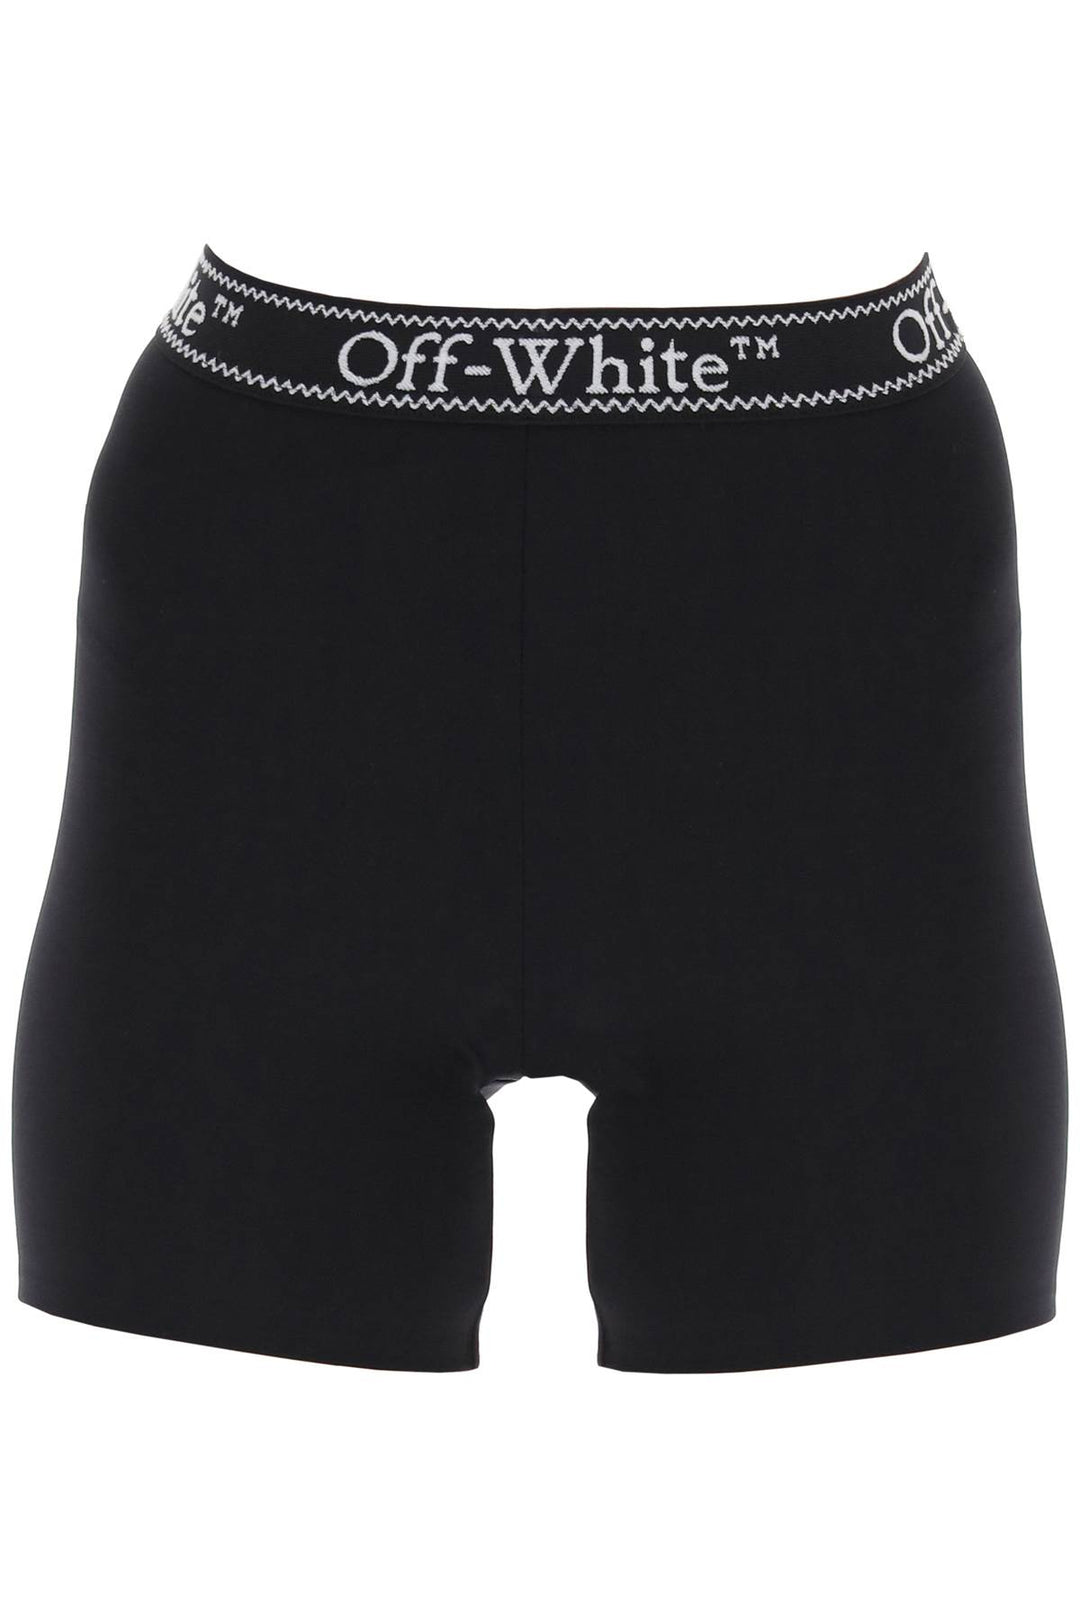 Off White Sporty Shorts With Branded Stripe   Nero